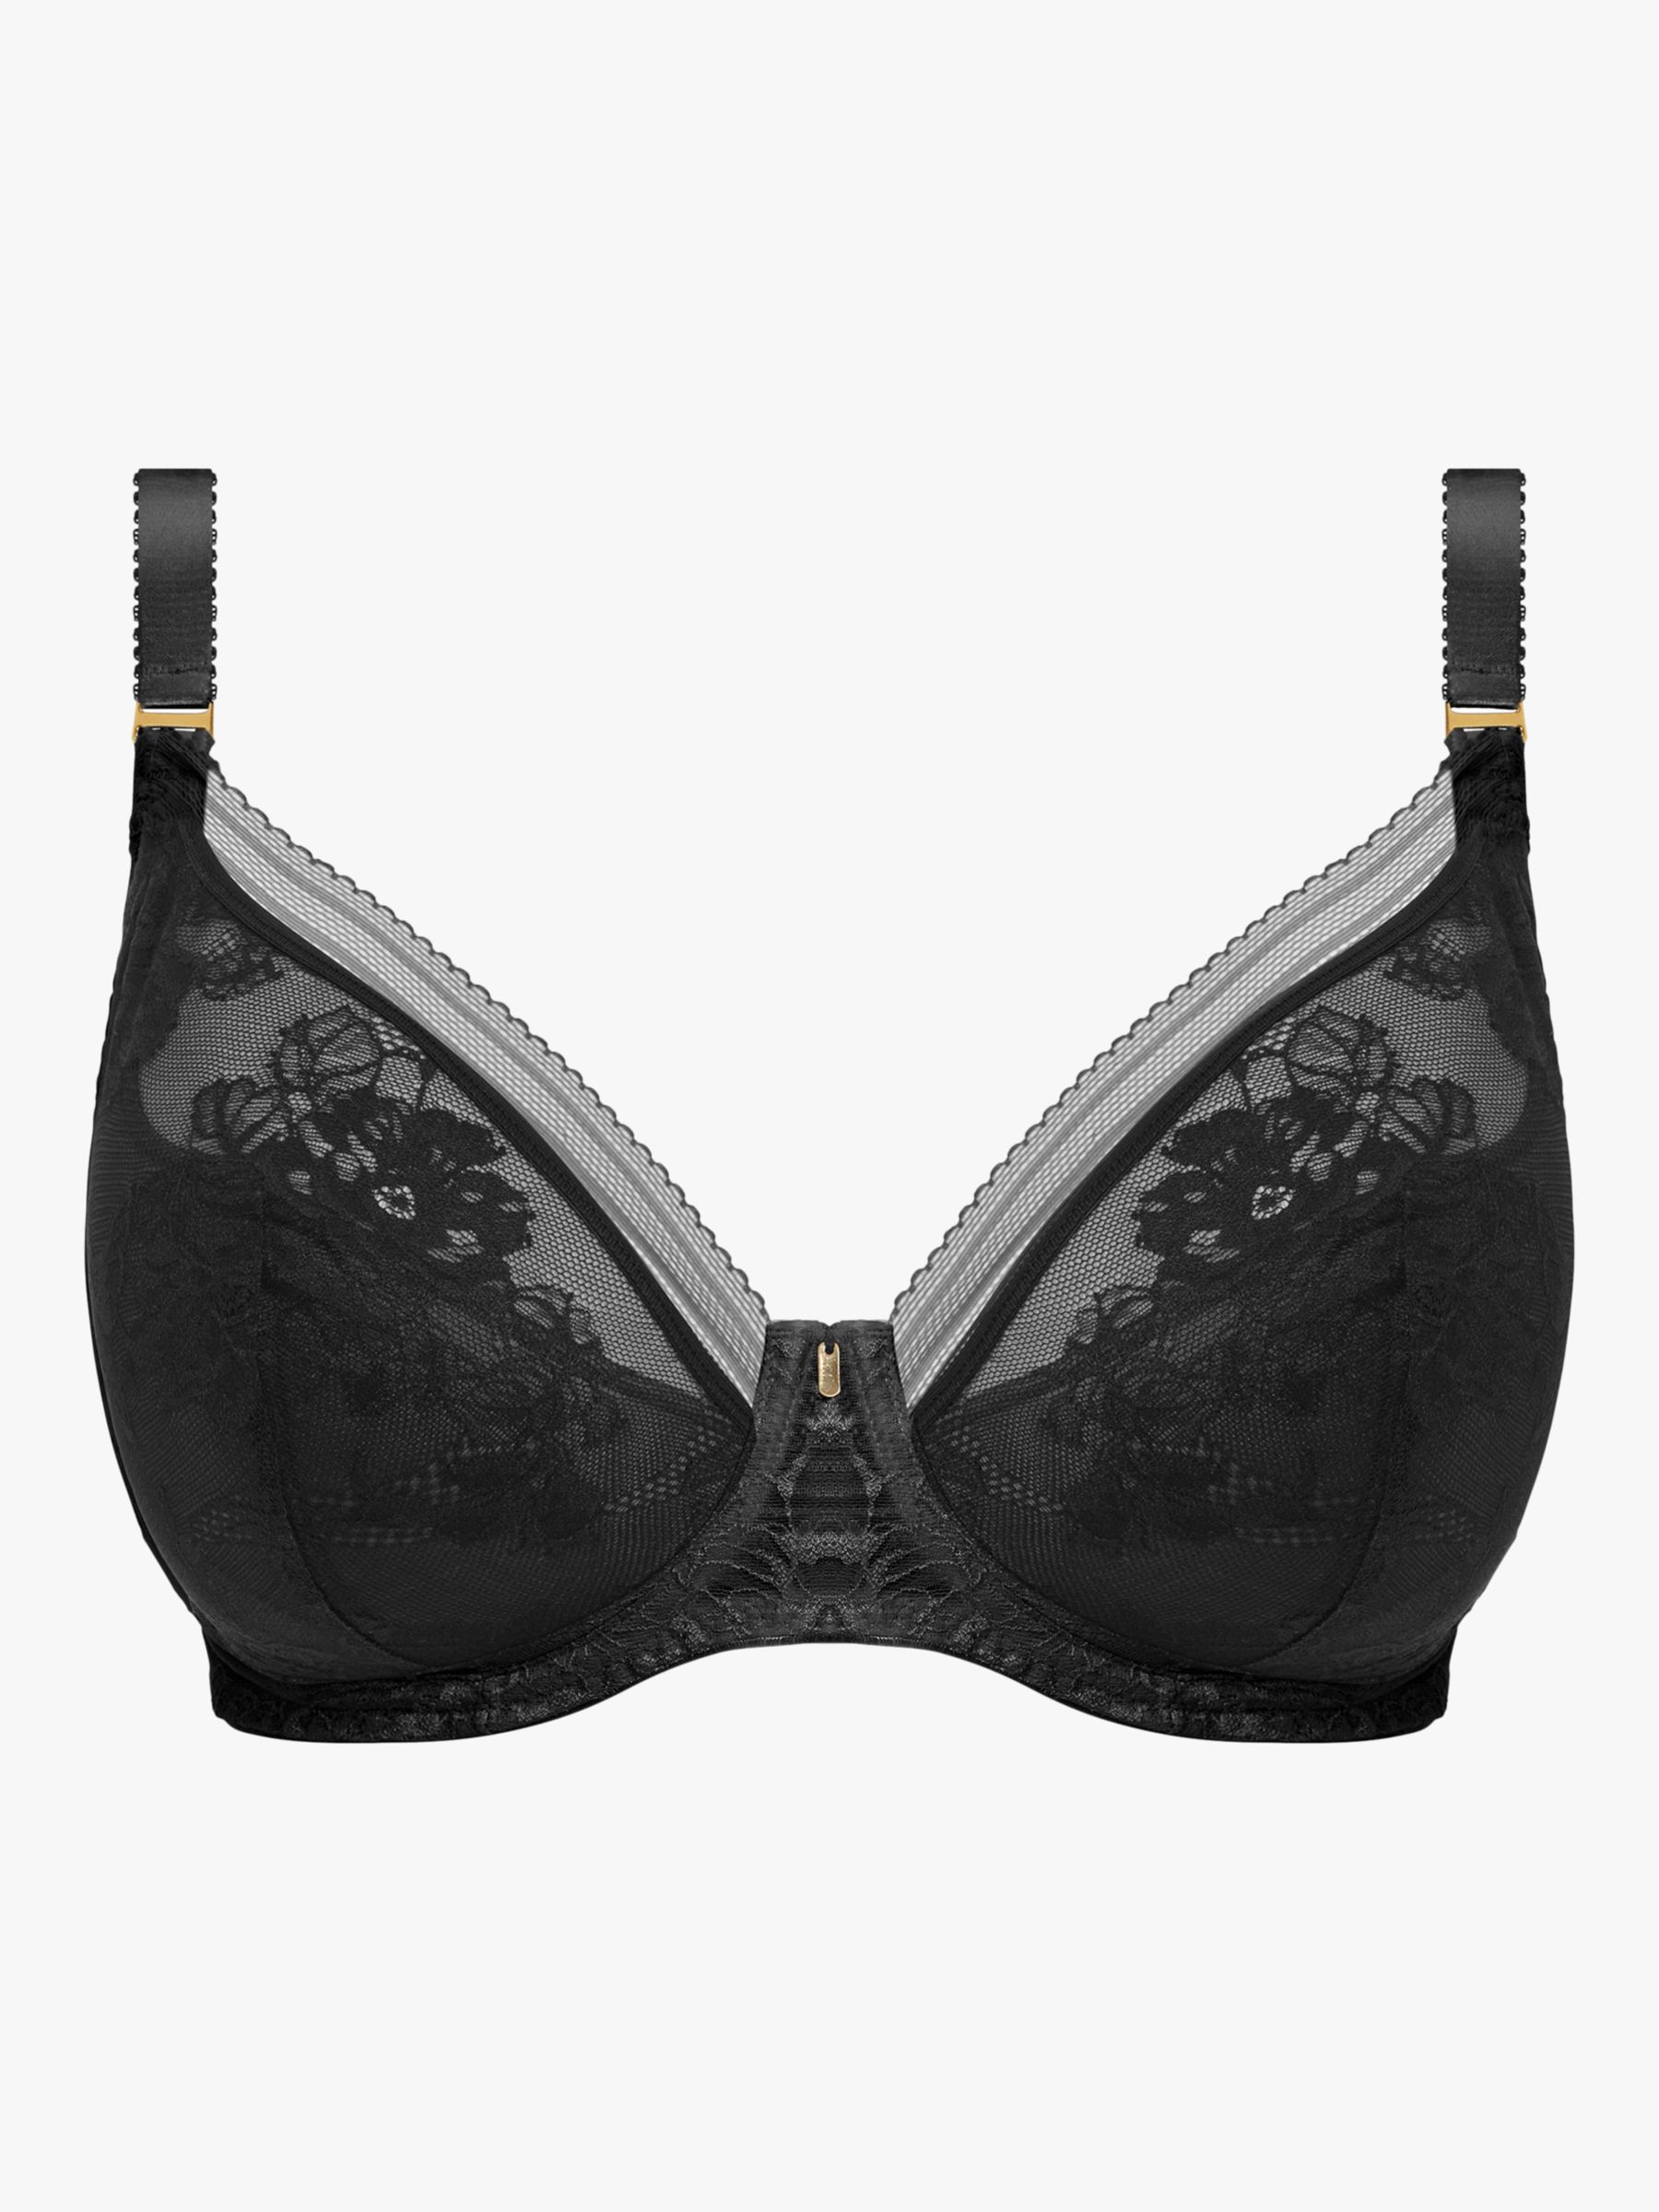 36FF Bra Size in Black Convertible, Lace Cup and Padded Bras